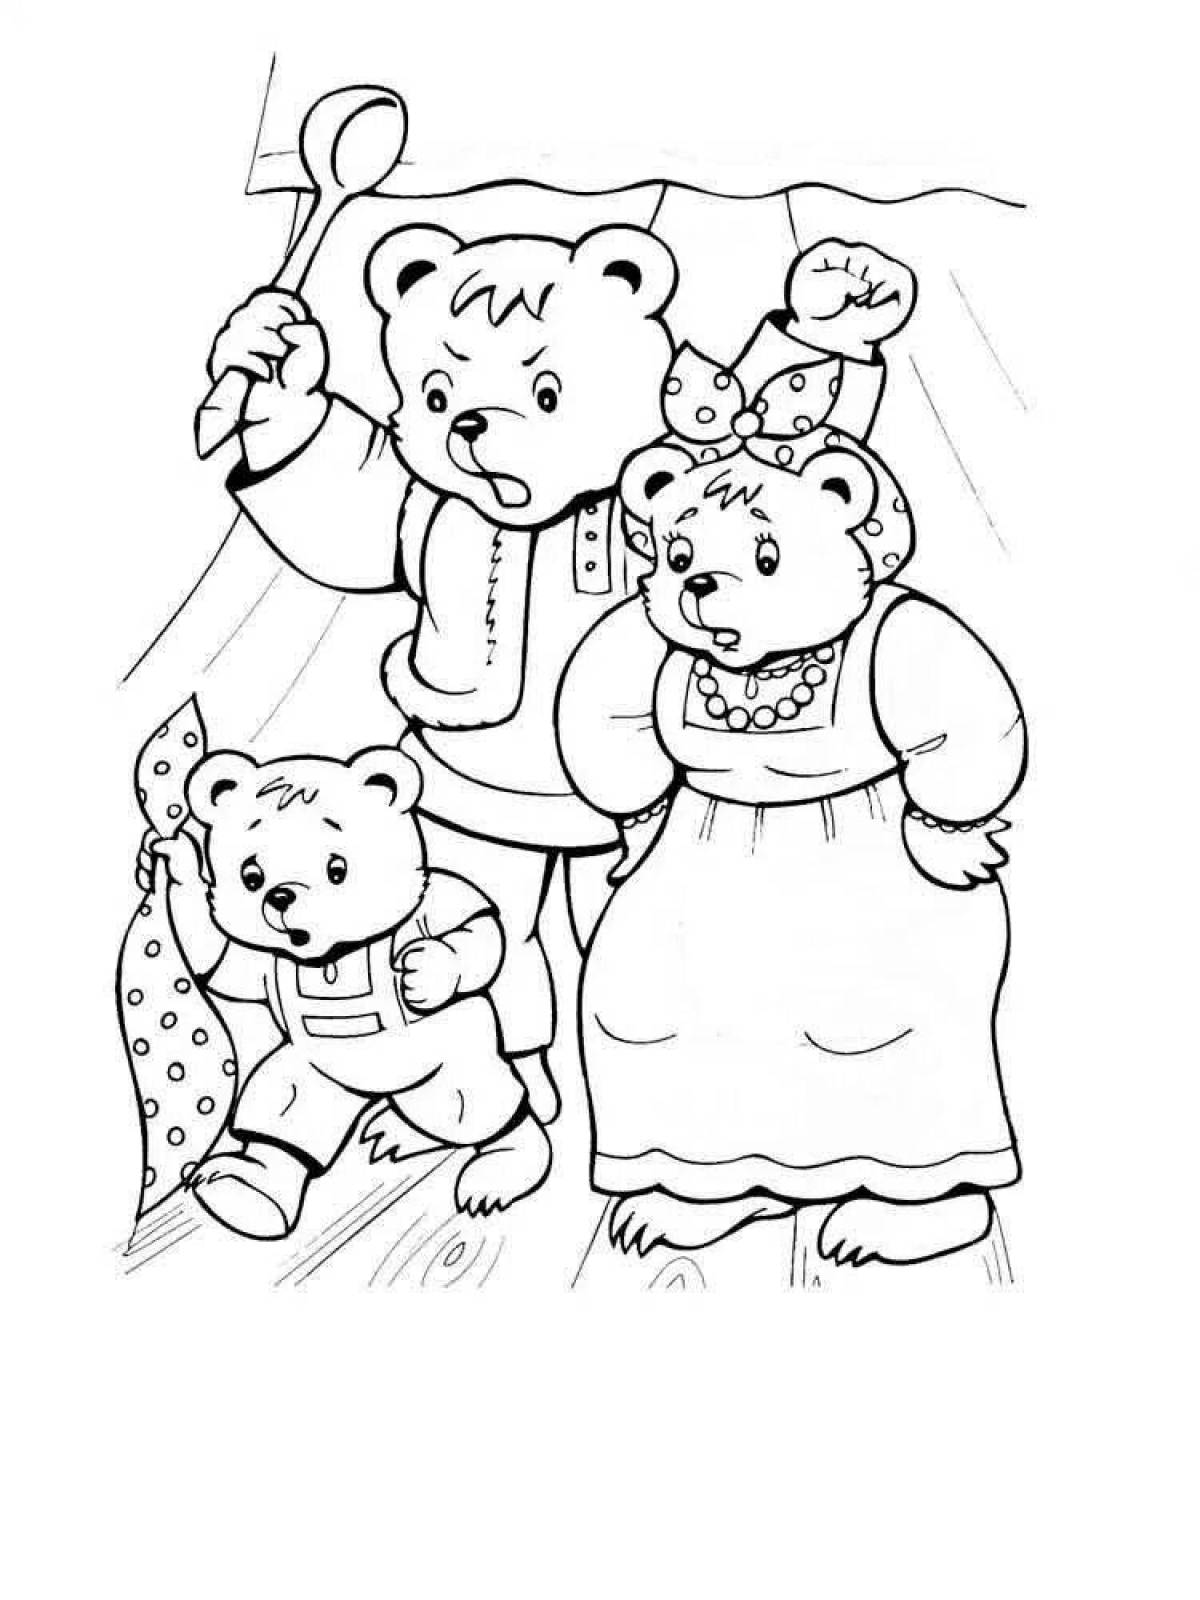 Colorful coloring of three bears